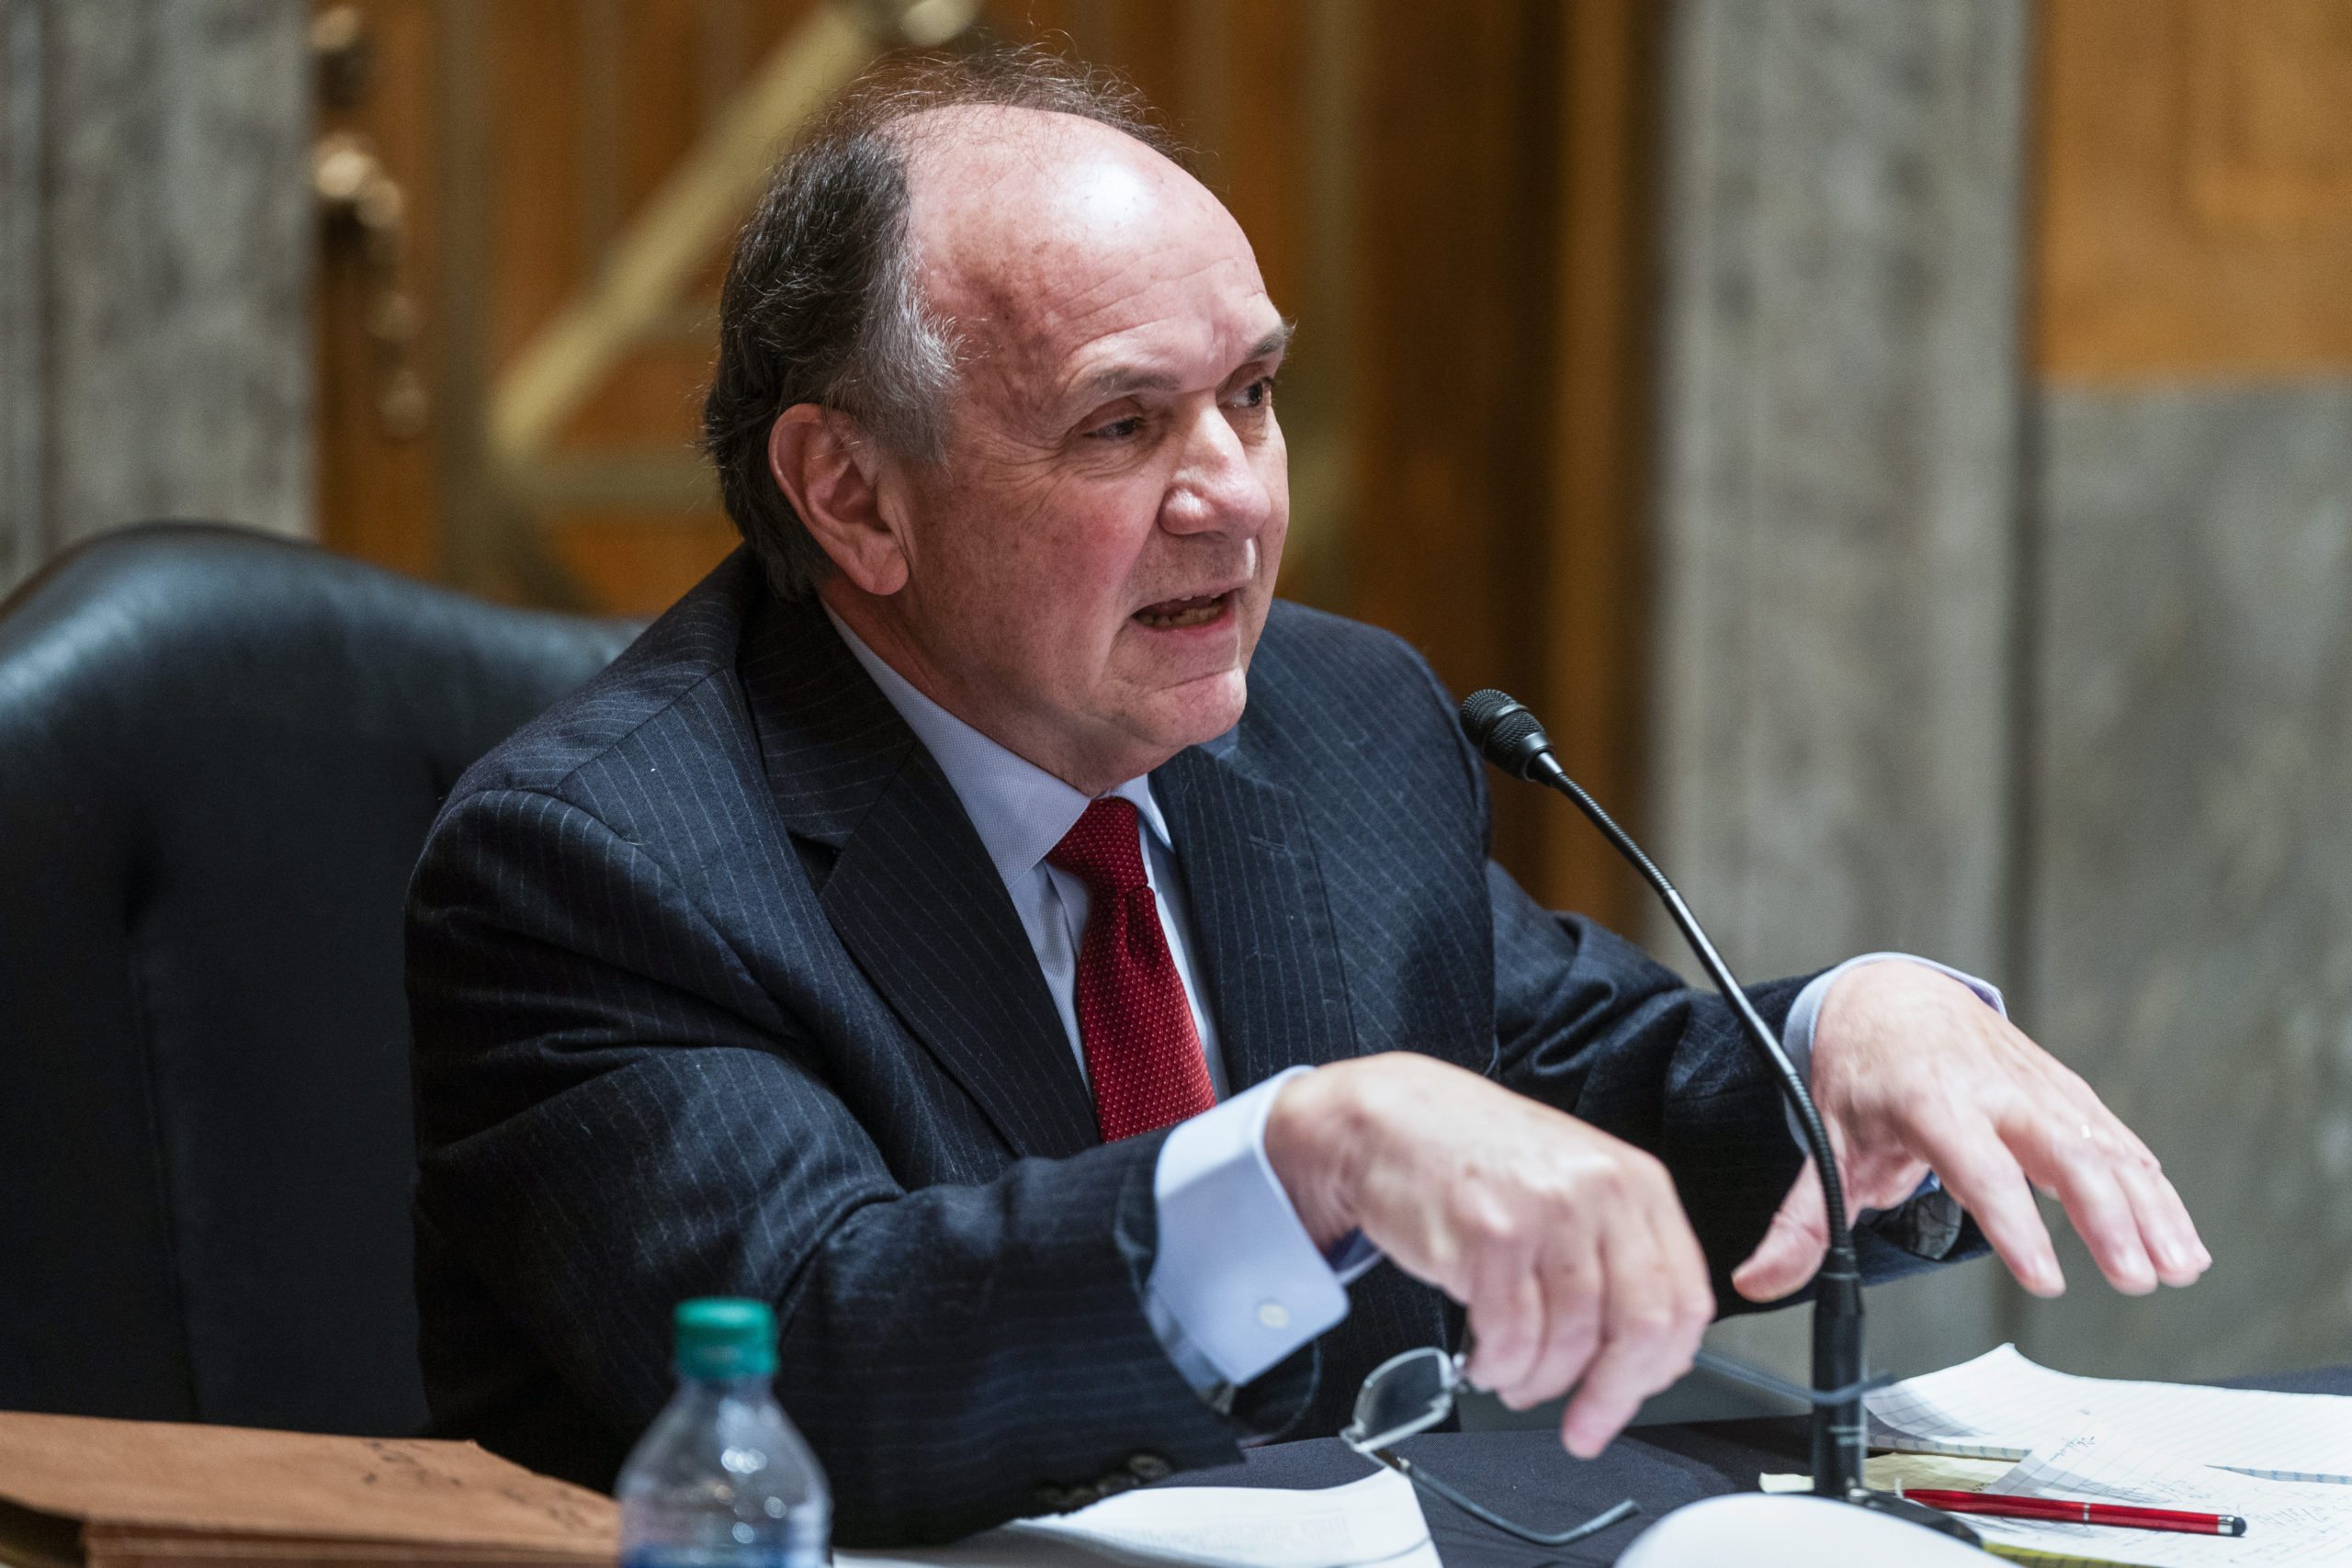 Jim Troupis, an attorney for then-President Donald Trump, speaks during a Senate Homeland Security & Governmental Affairs Committee hearing to discuss election security and the 2020 election process on Dec. 16, 2020, on Capitol Hill.